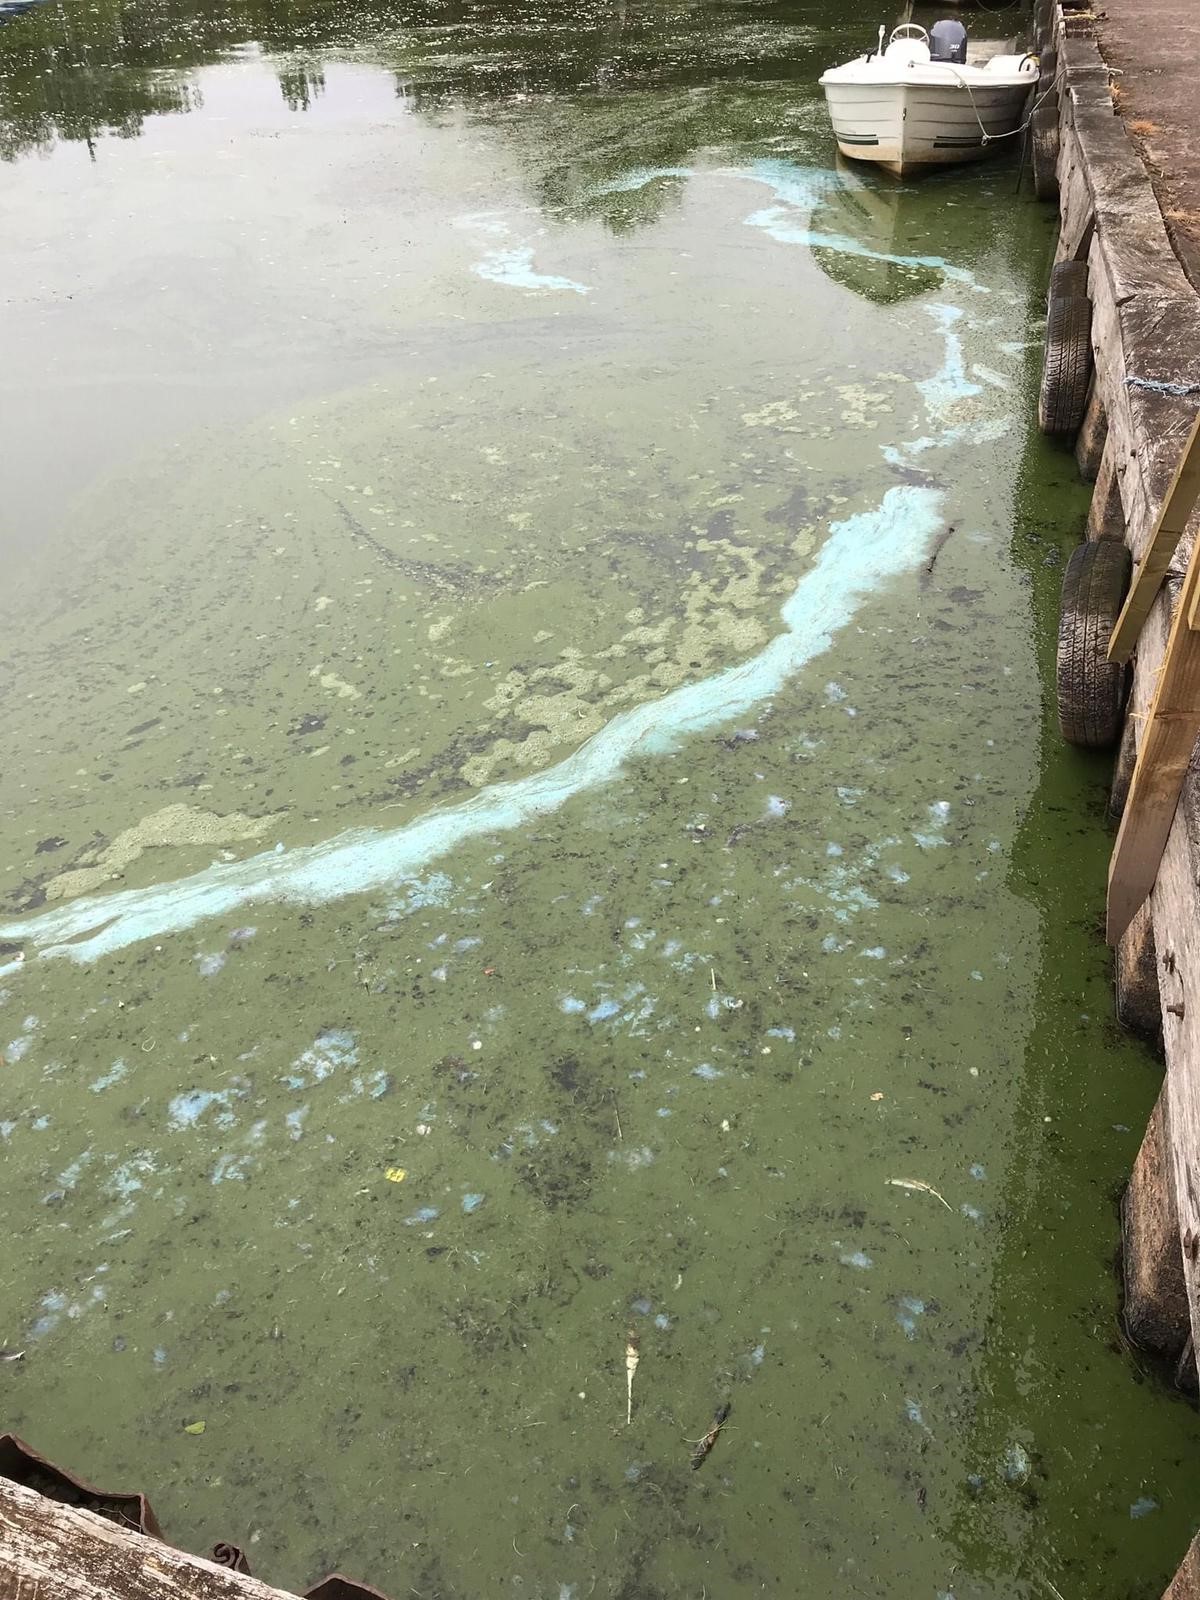 Blue-green algae in the water at Loch Leven National Nature Reserve.